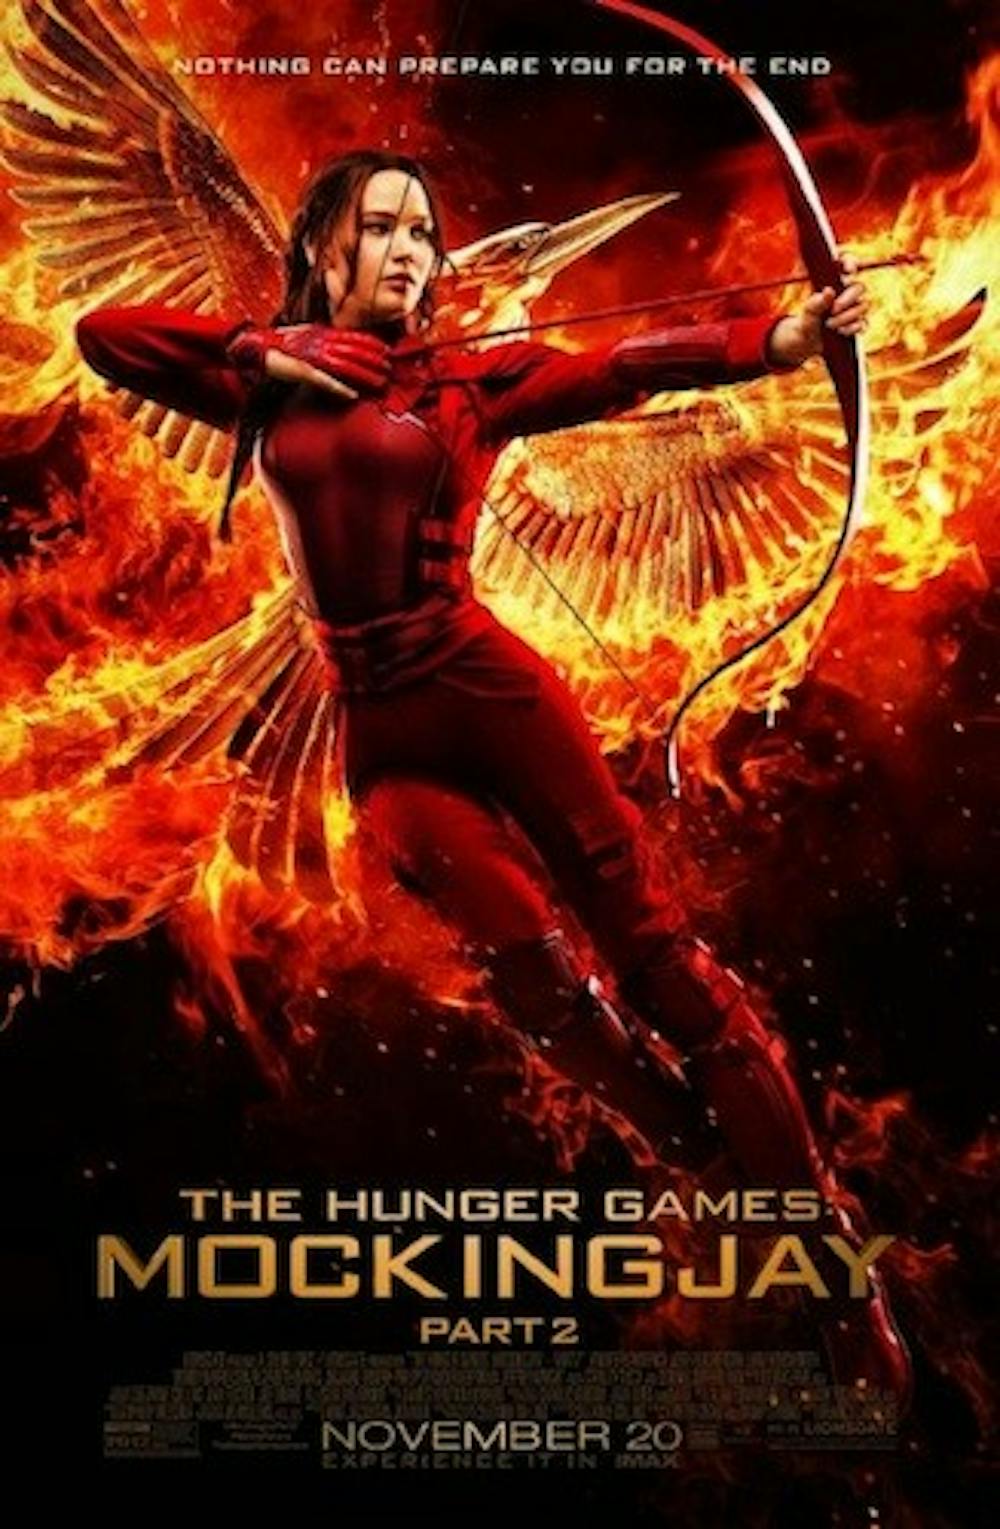 <p>The latest installment of "The Hunger Games" franchise ties up loose ends.</p>